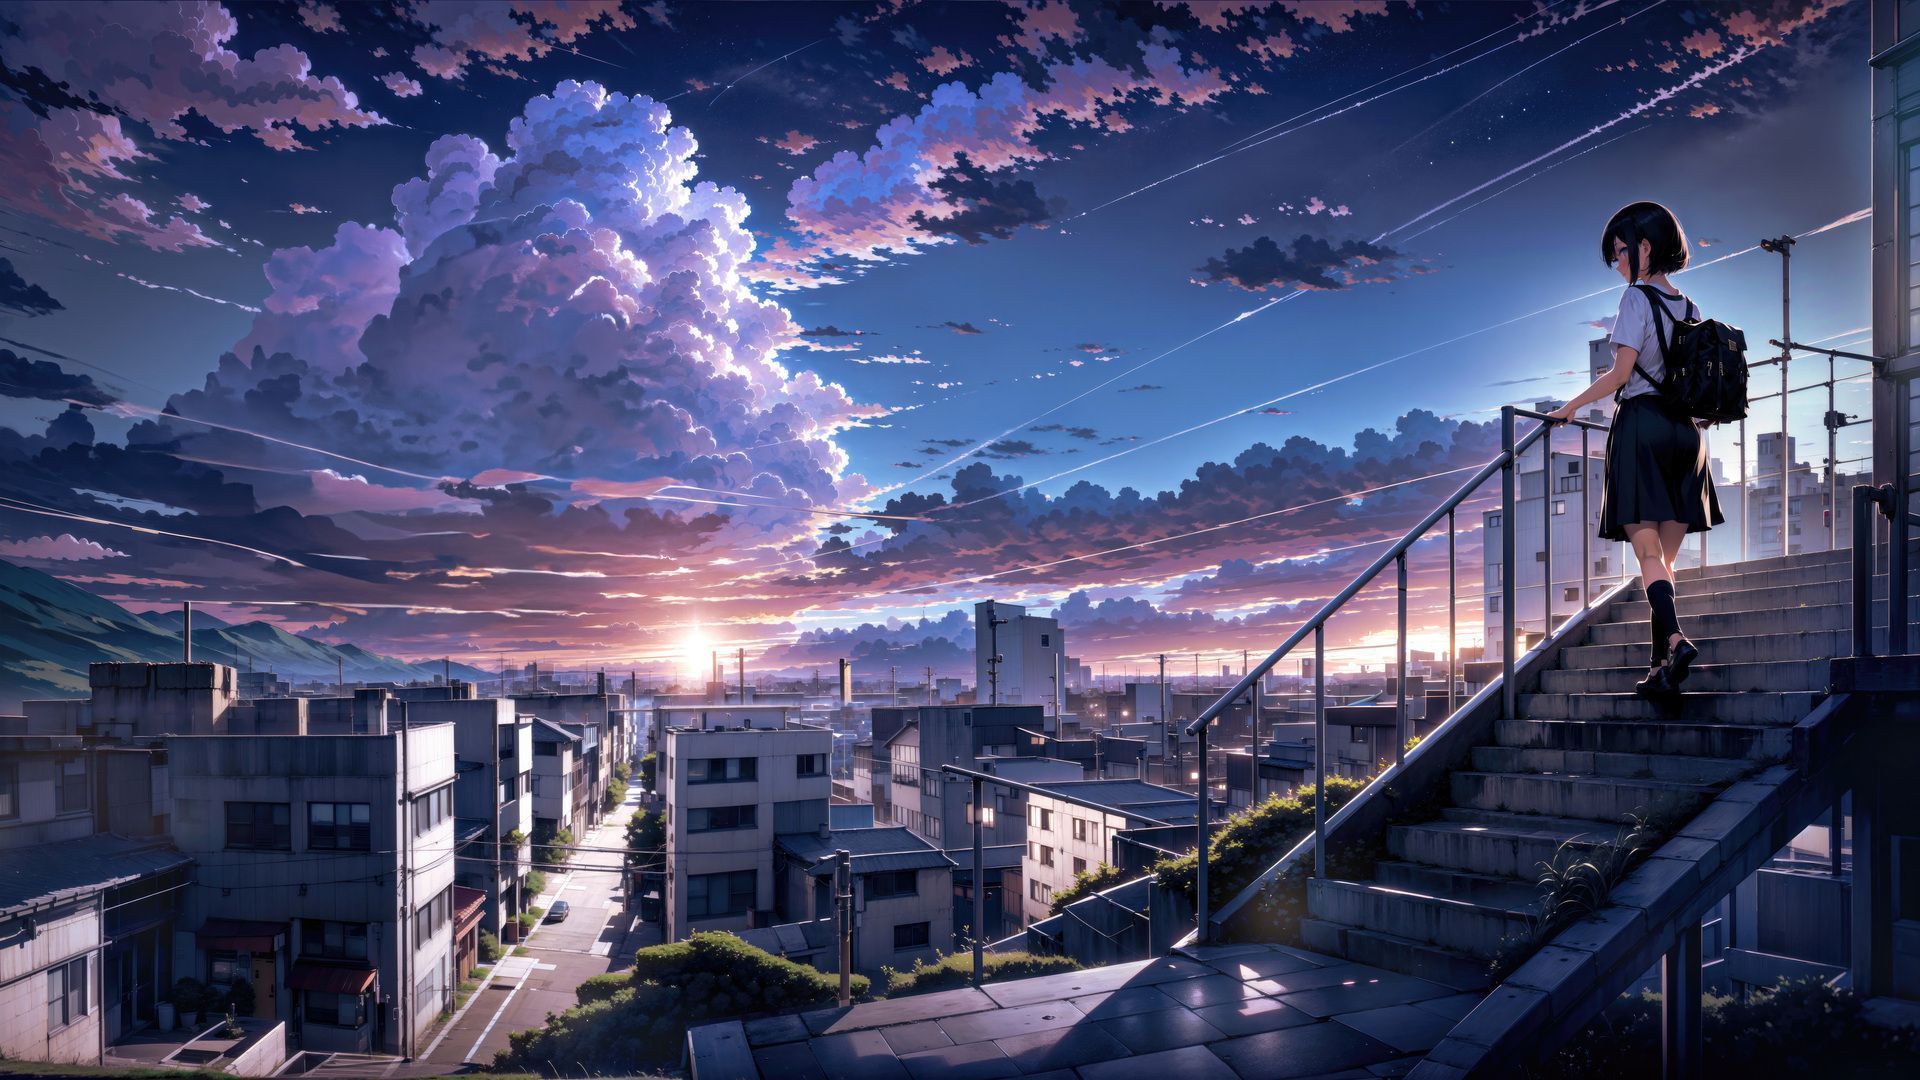 1920x1080 anime, 5 Centimeters Per Second, stairs, the city, the girl, sunset, anime girls, wallpaper - 1920x1080, cityscape